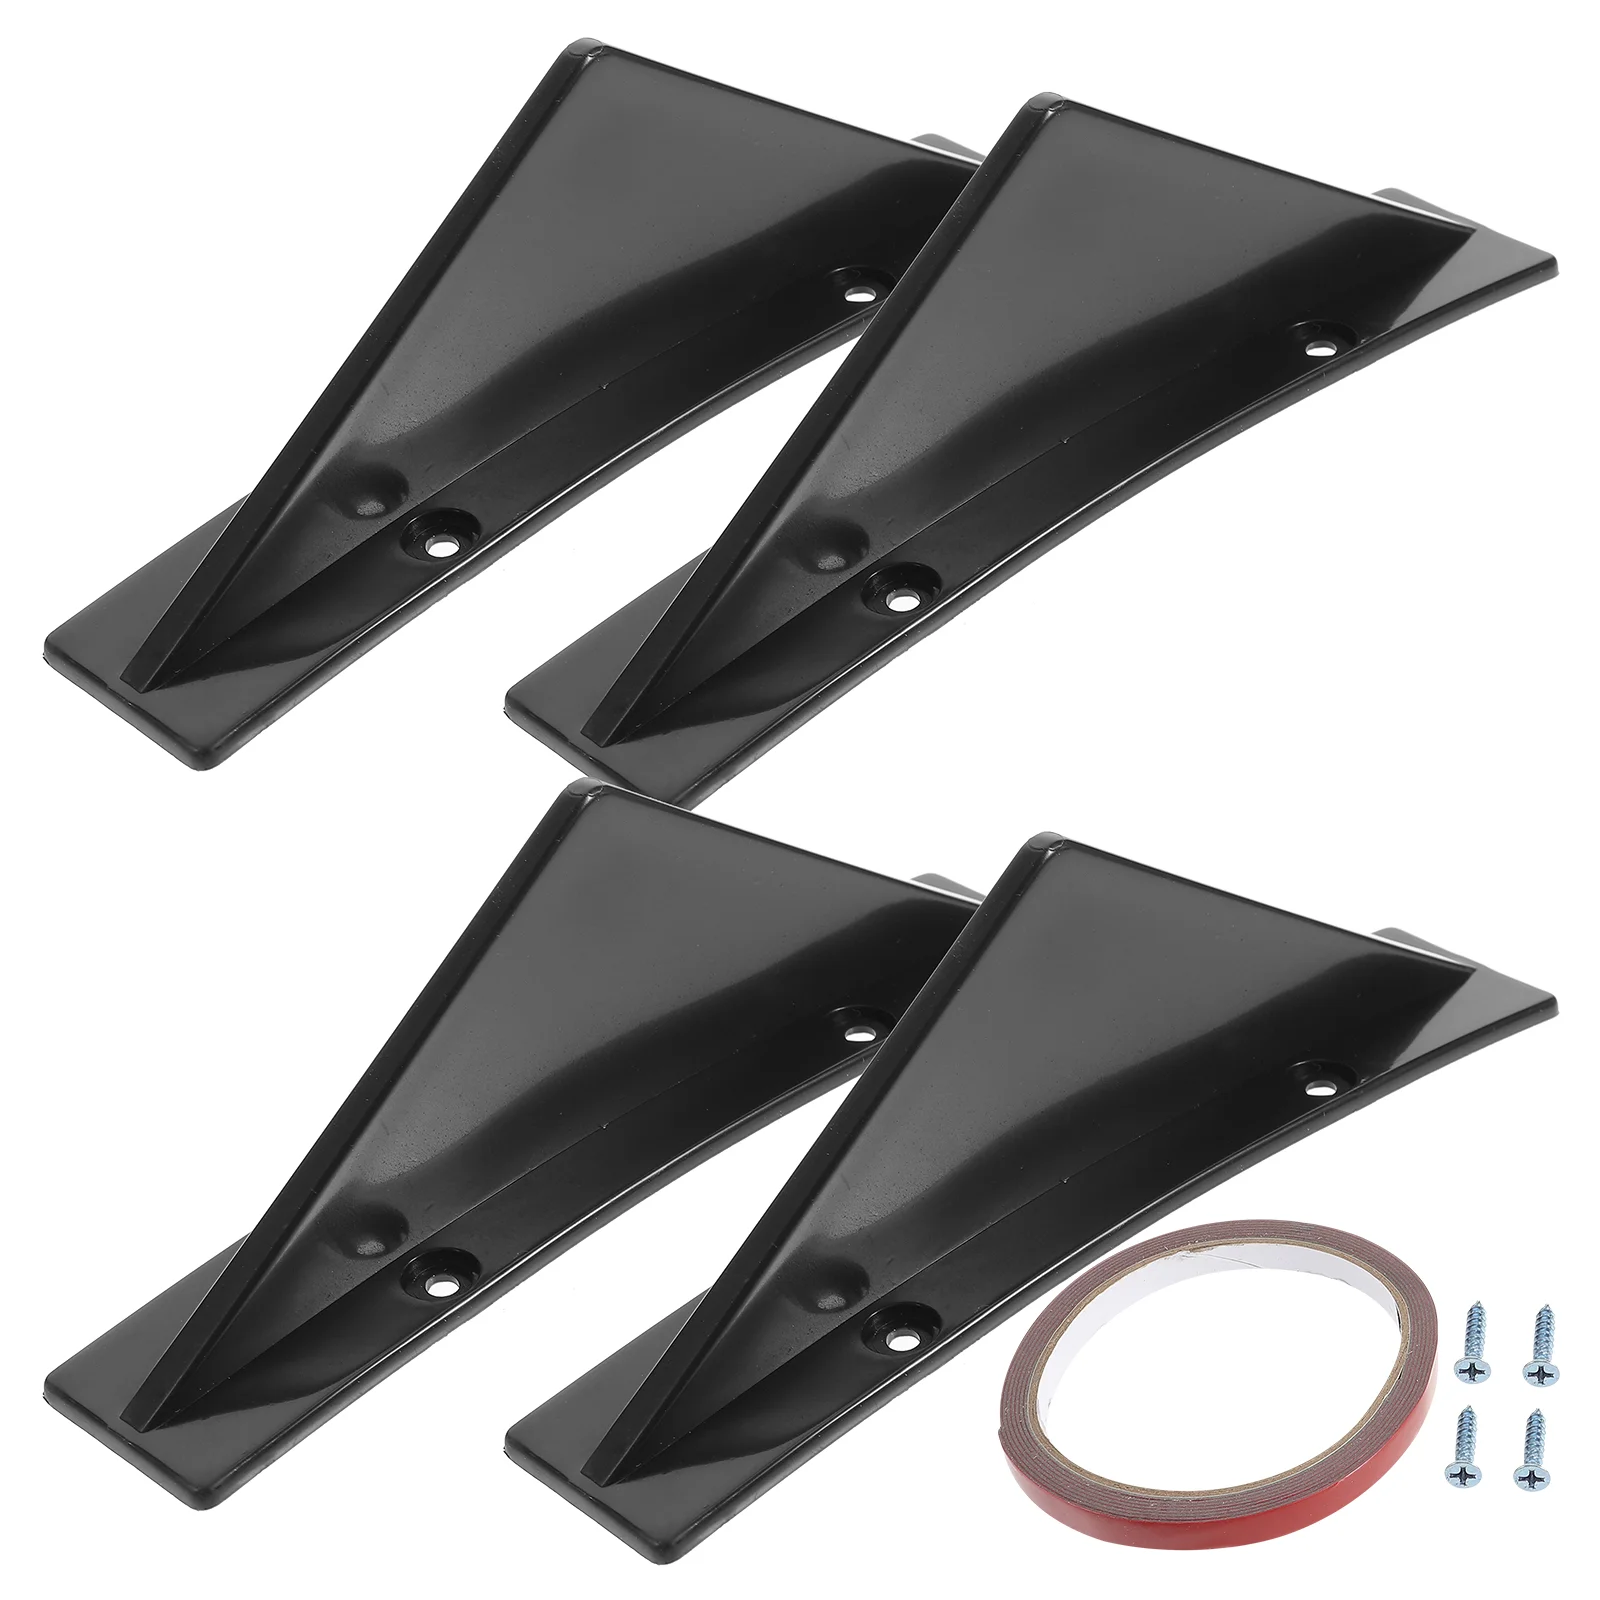 

Spoiler Rear Car Bumper Lip Fin Diffuser Suv Wing Accessories Sports Trunk Surrounded Truck Diversion Chassis Spoilers for cars